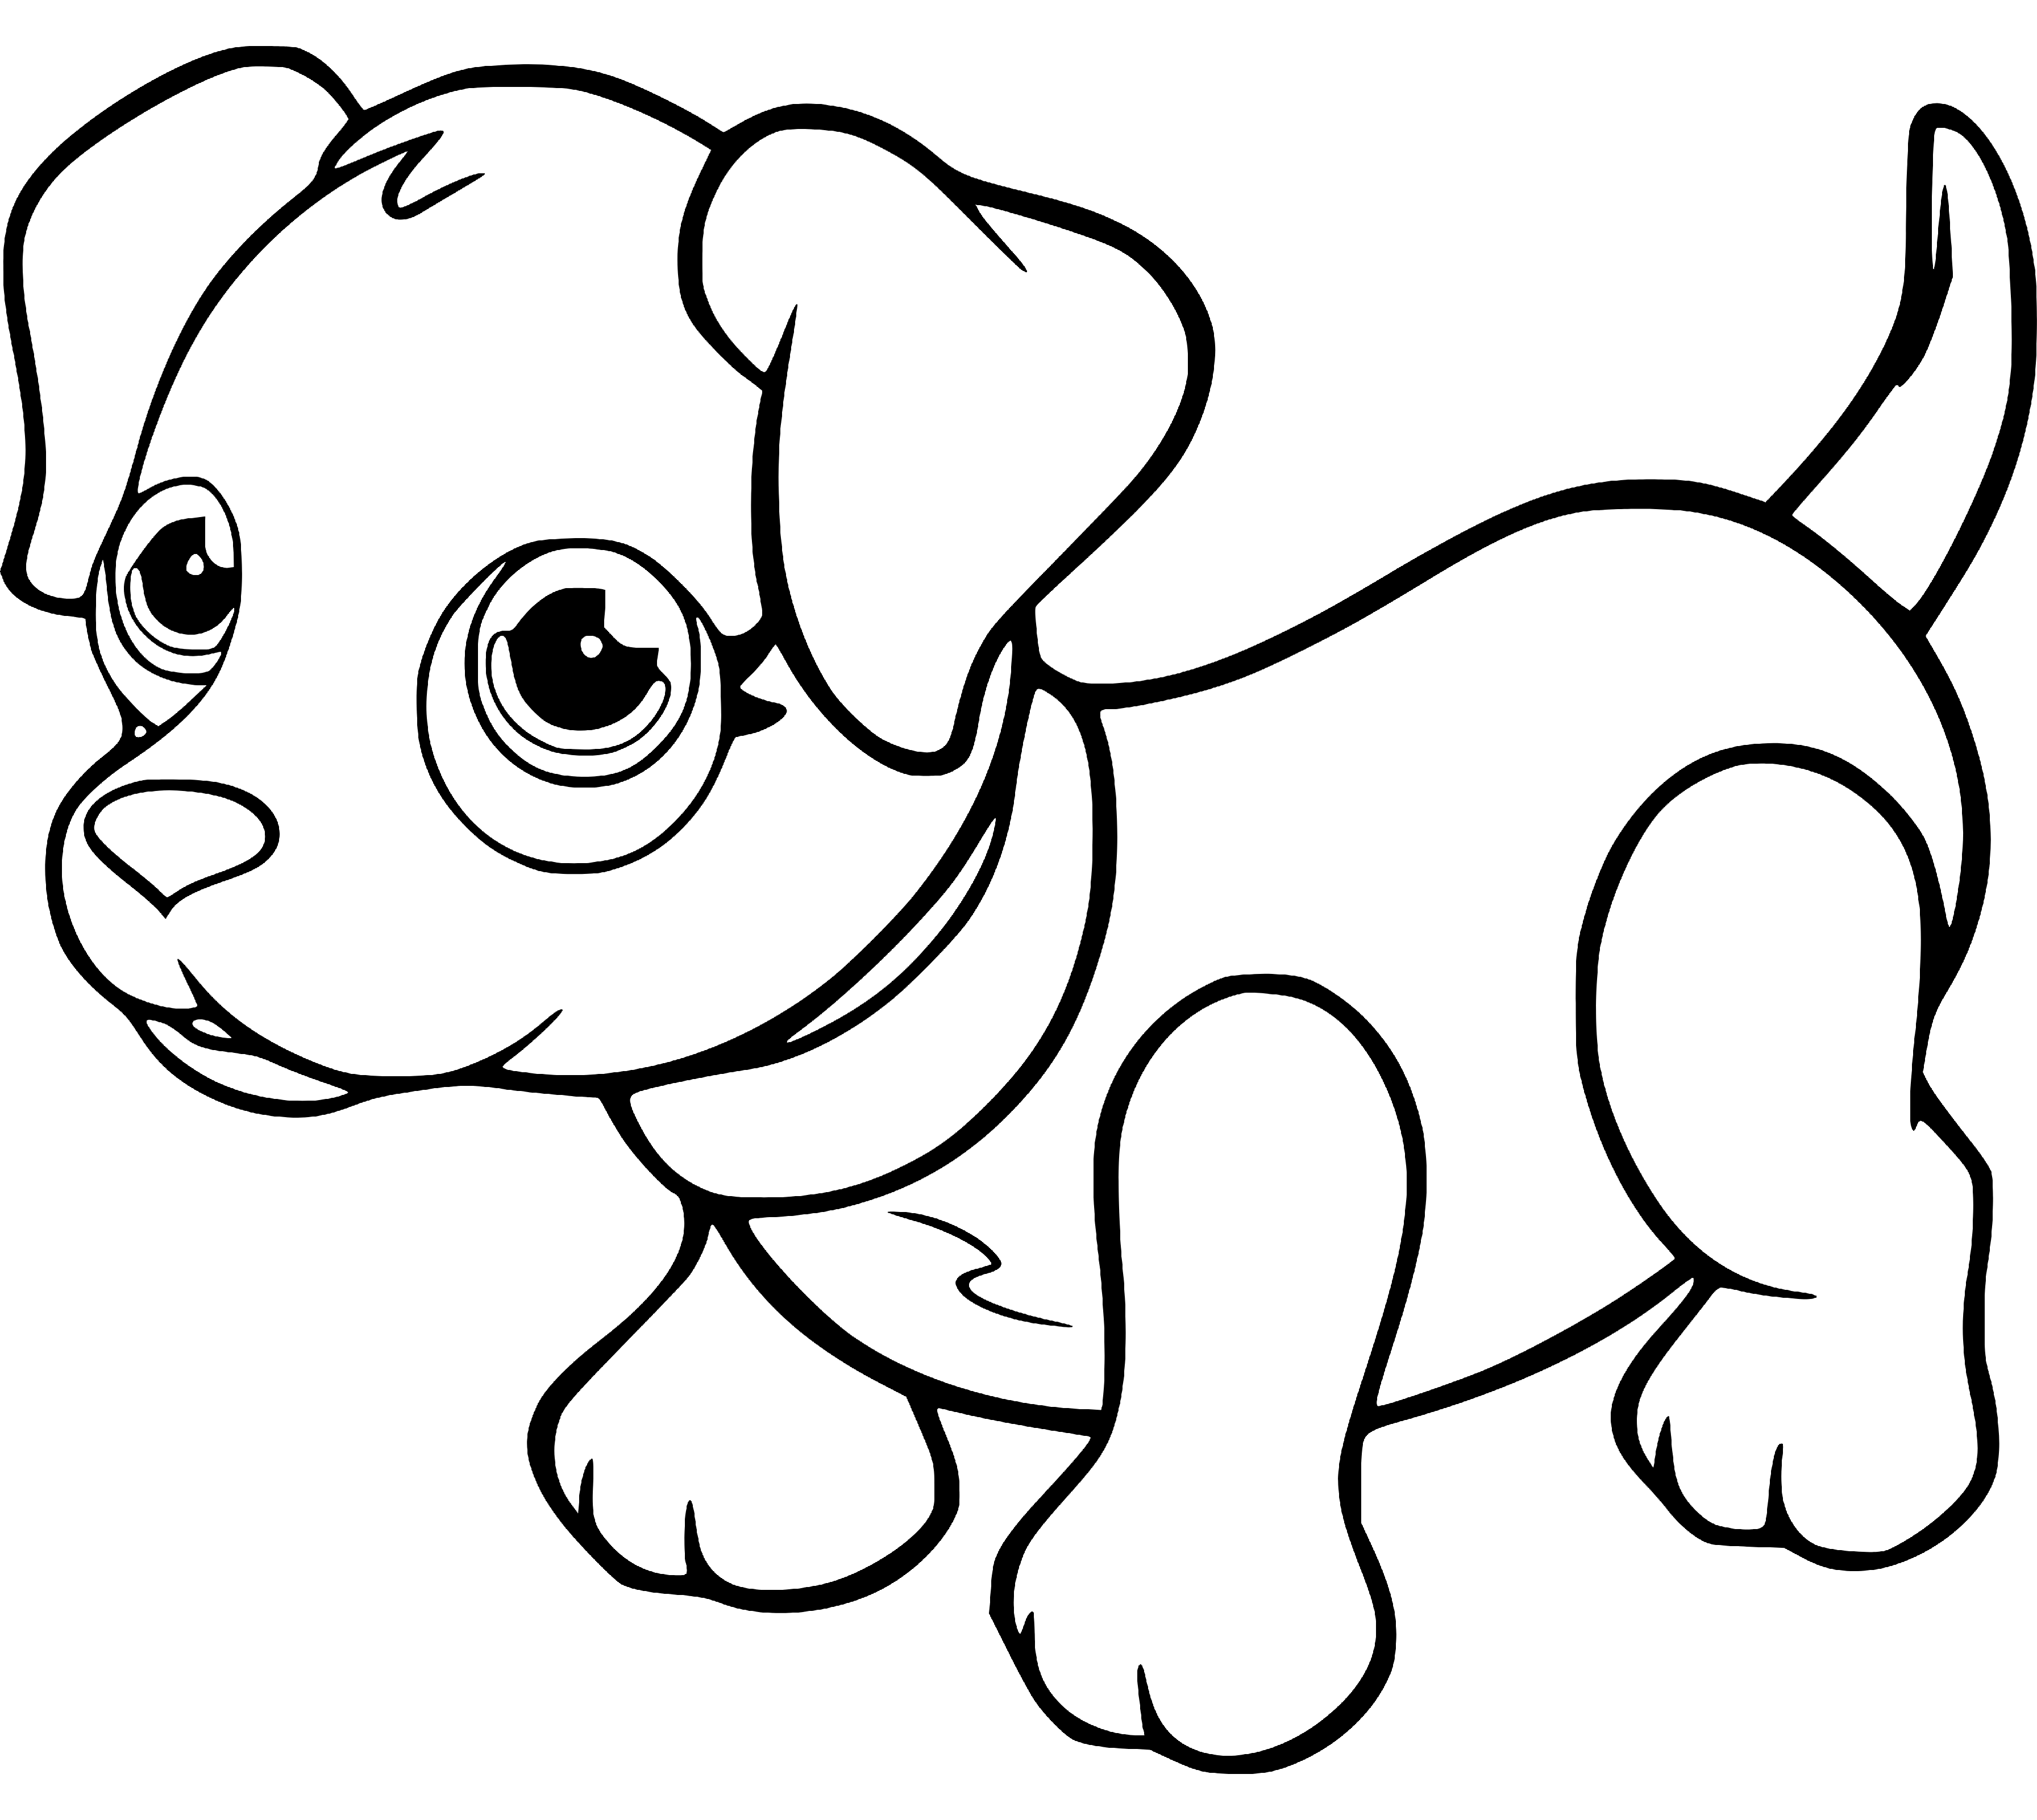 Printable Cute Little Puppy Coloring Page for kids.